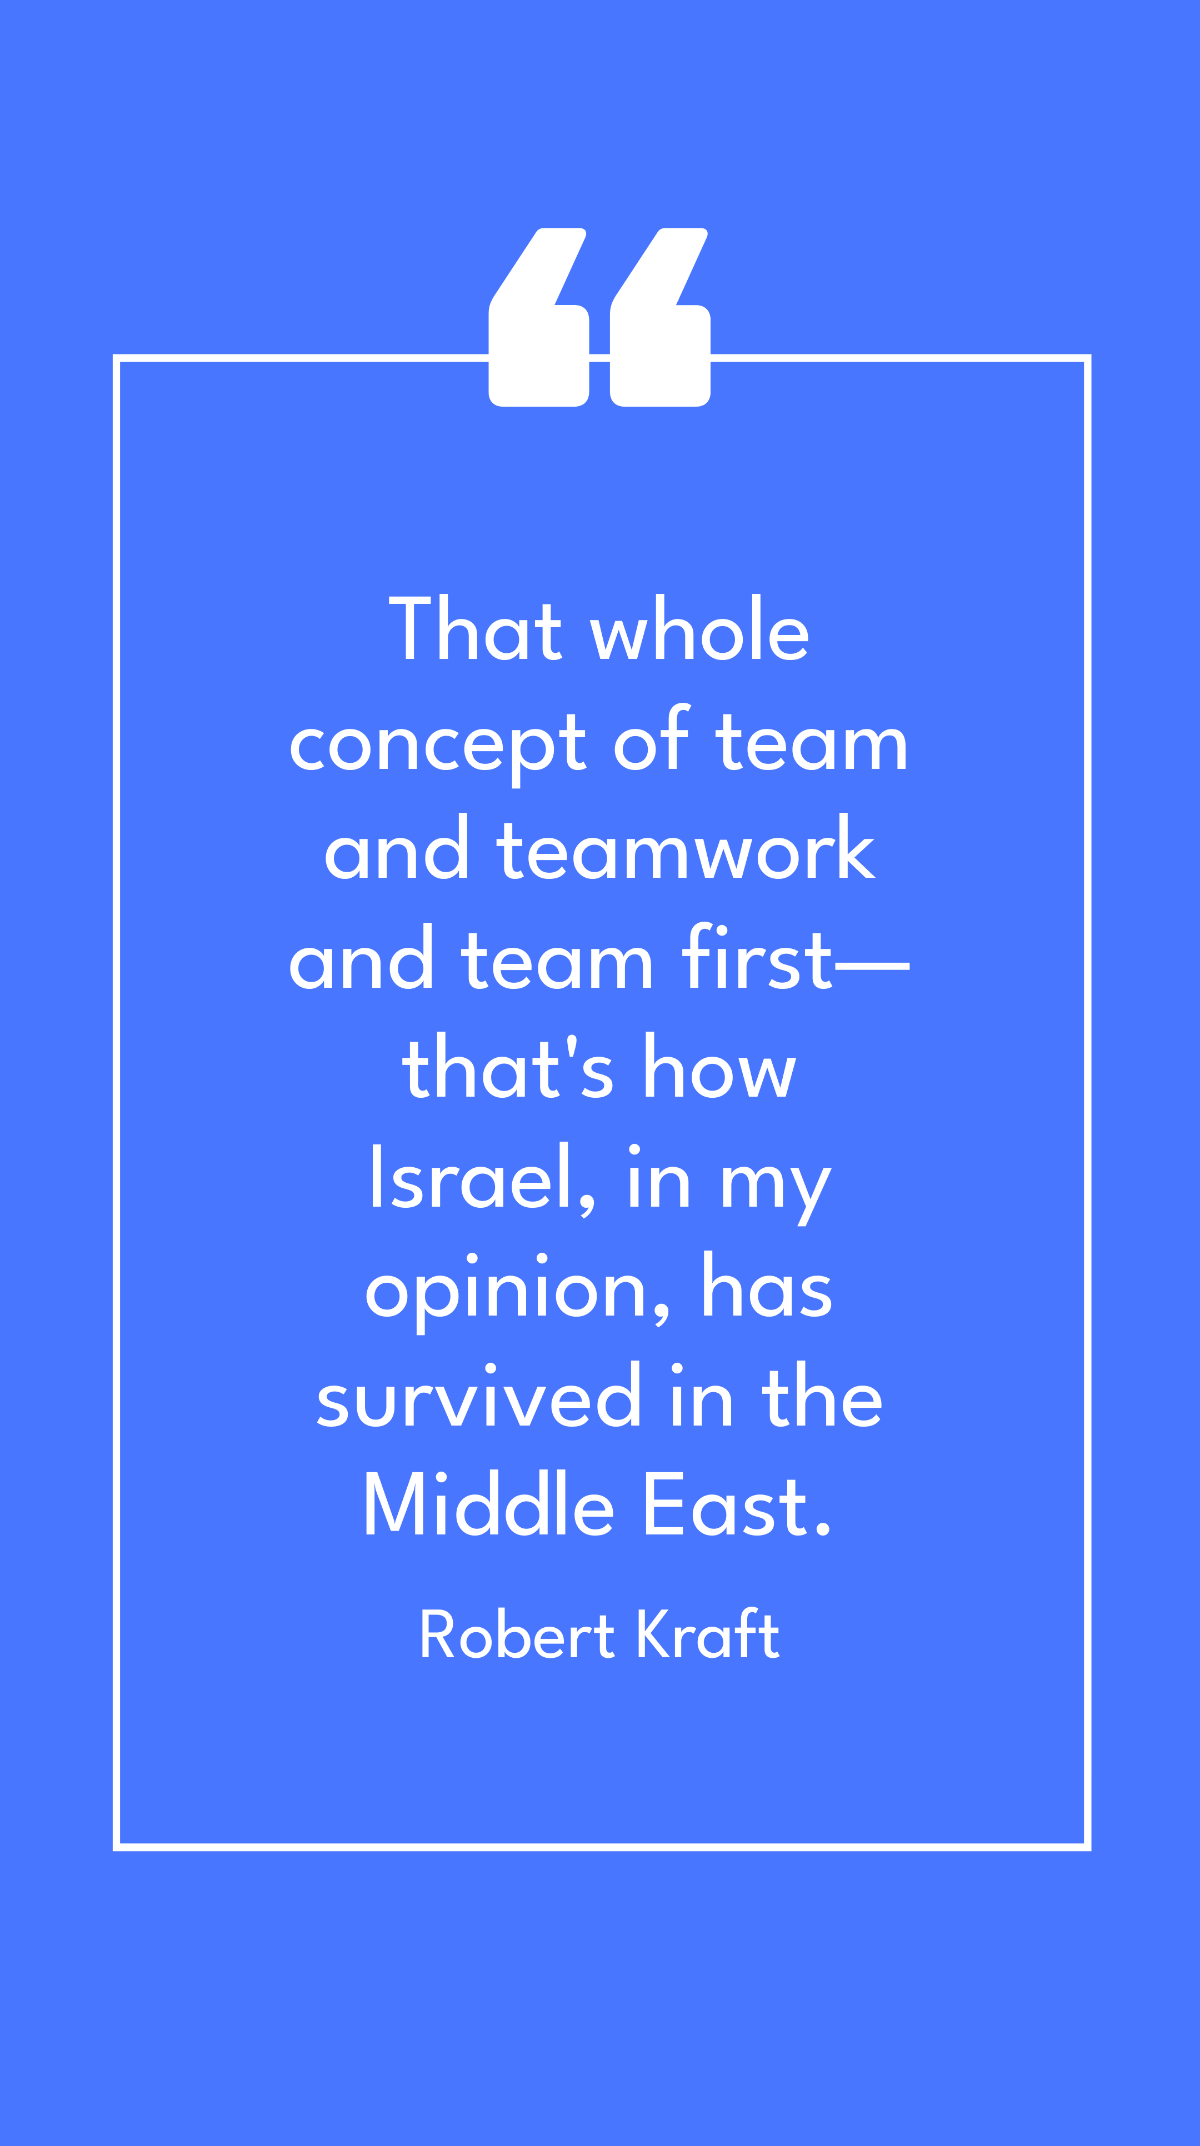 Robert Kraft - That whole concept of team and teamwork and team first - that's how Israel, in my opinion, has survived in the Middle East.